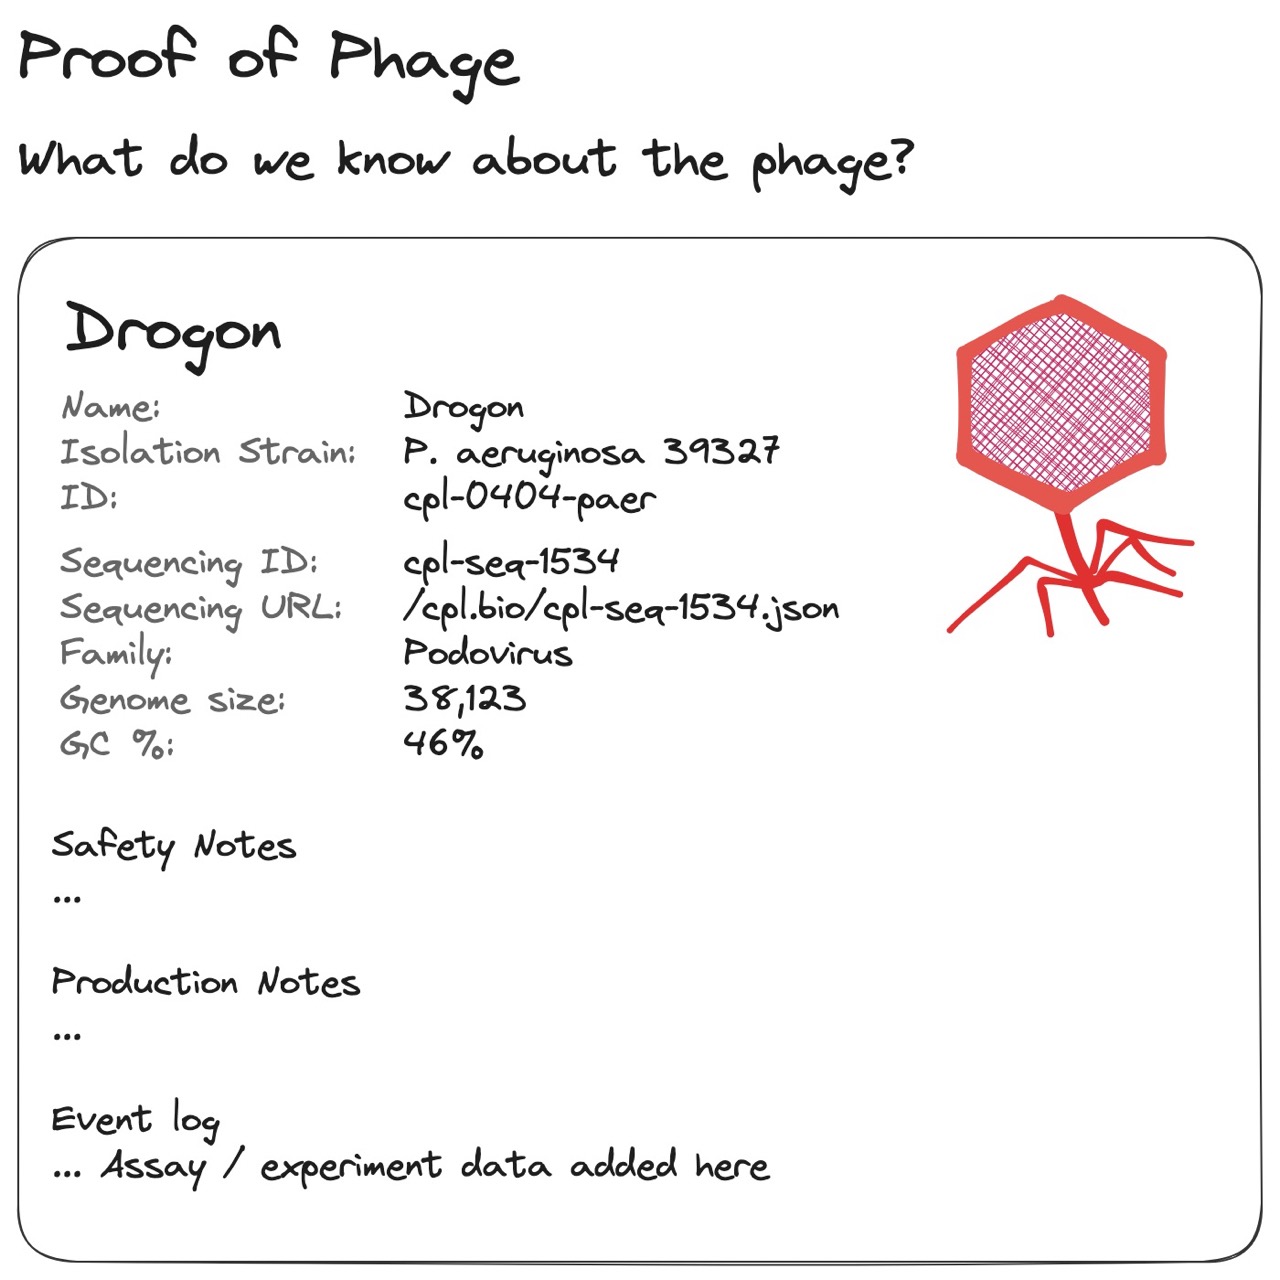 Fig 3. An illustration of a “Pokédex-like” phage entry, where attributes about a phage should be calculated from its assay results and genomic data. Lab results should be auditable, and genome sequences and config files should be shareable.